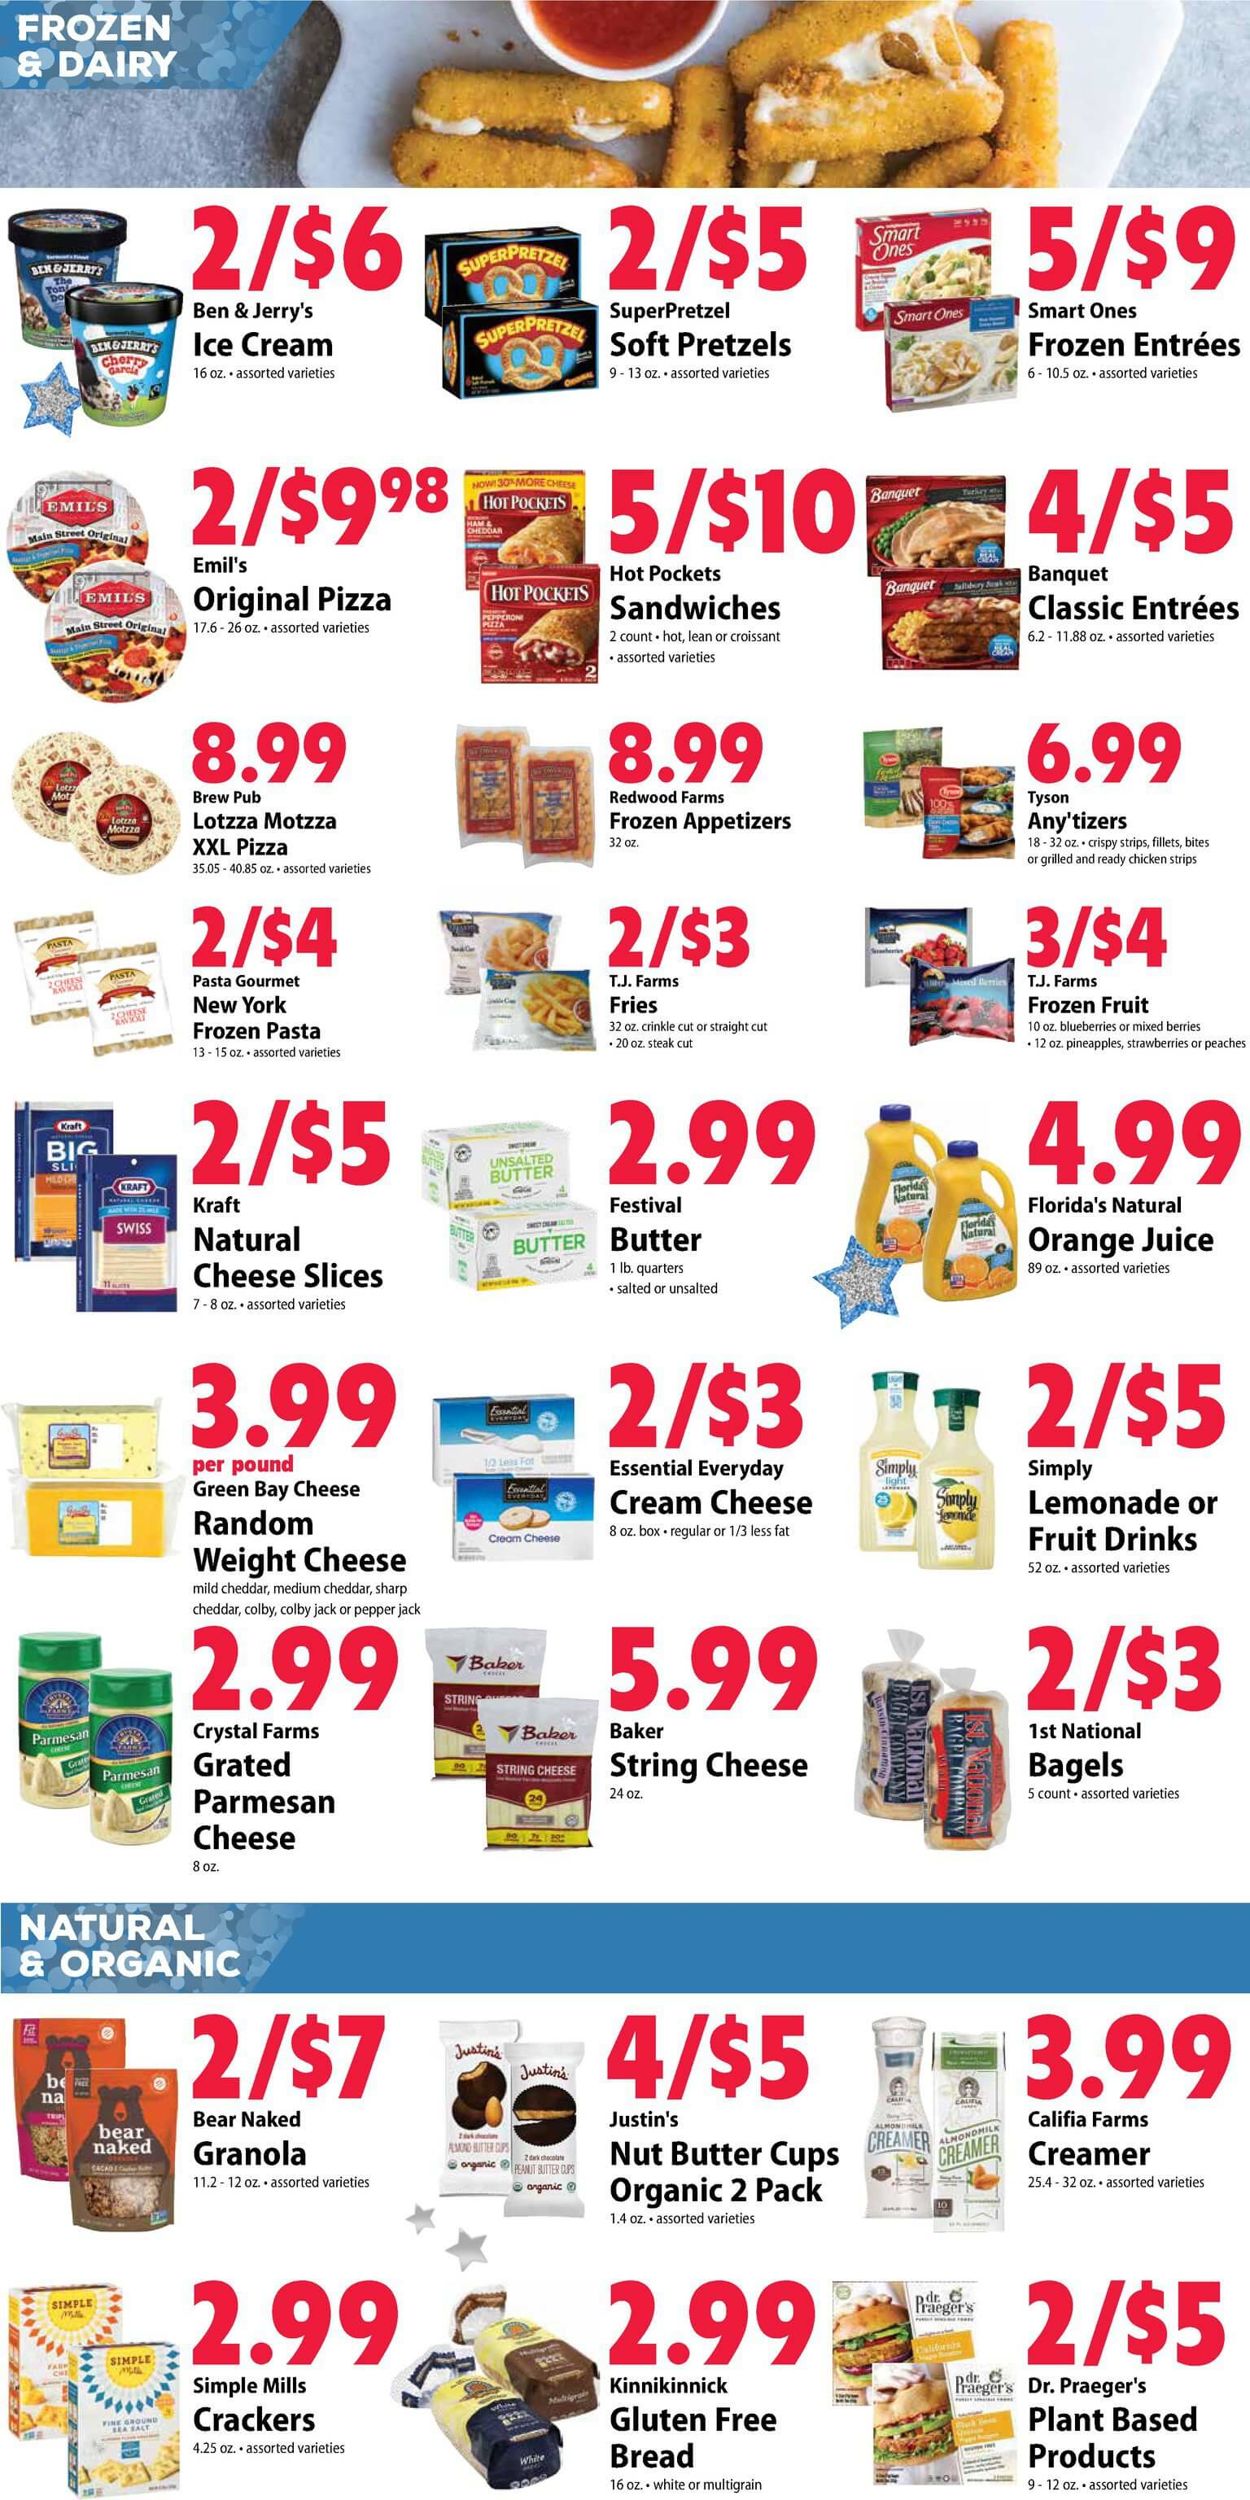 Catalogue Festival Foods - New Year's Ad 2019/2020 from 12/25/2019